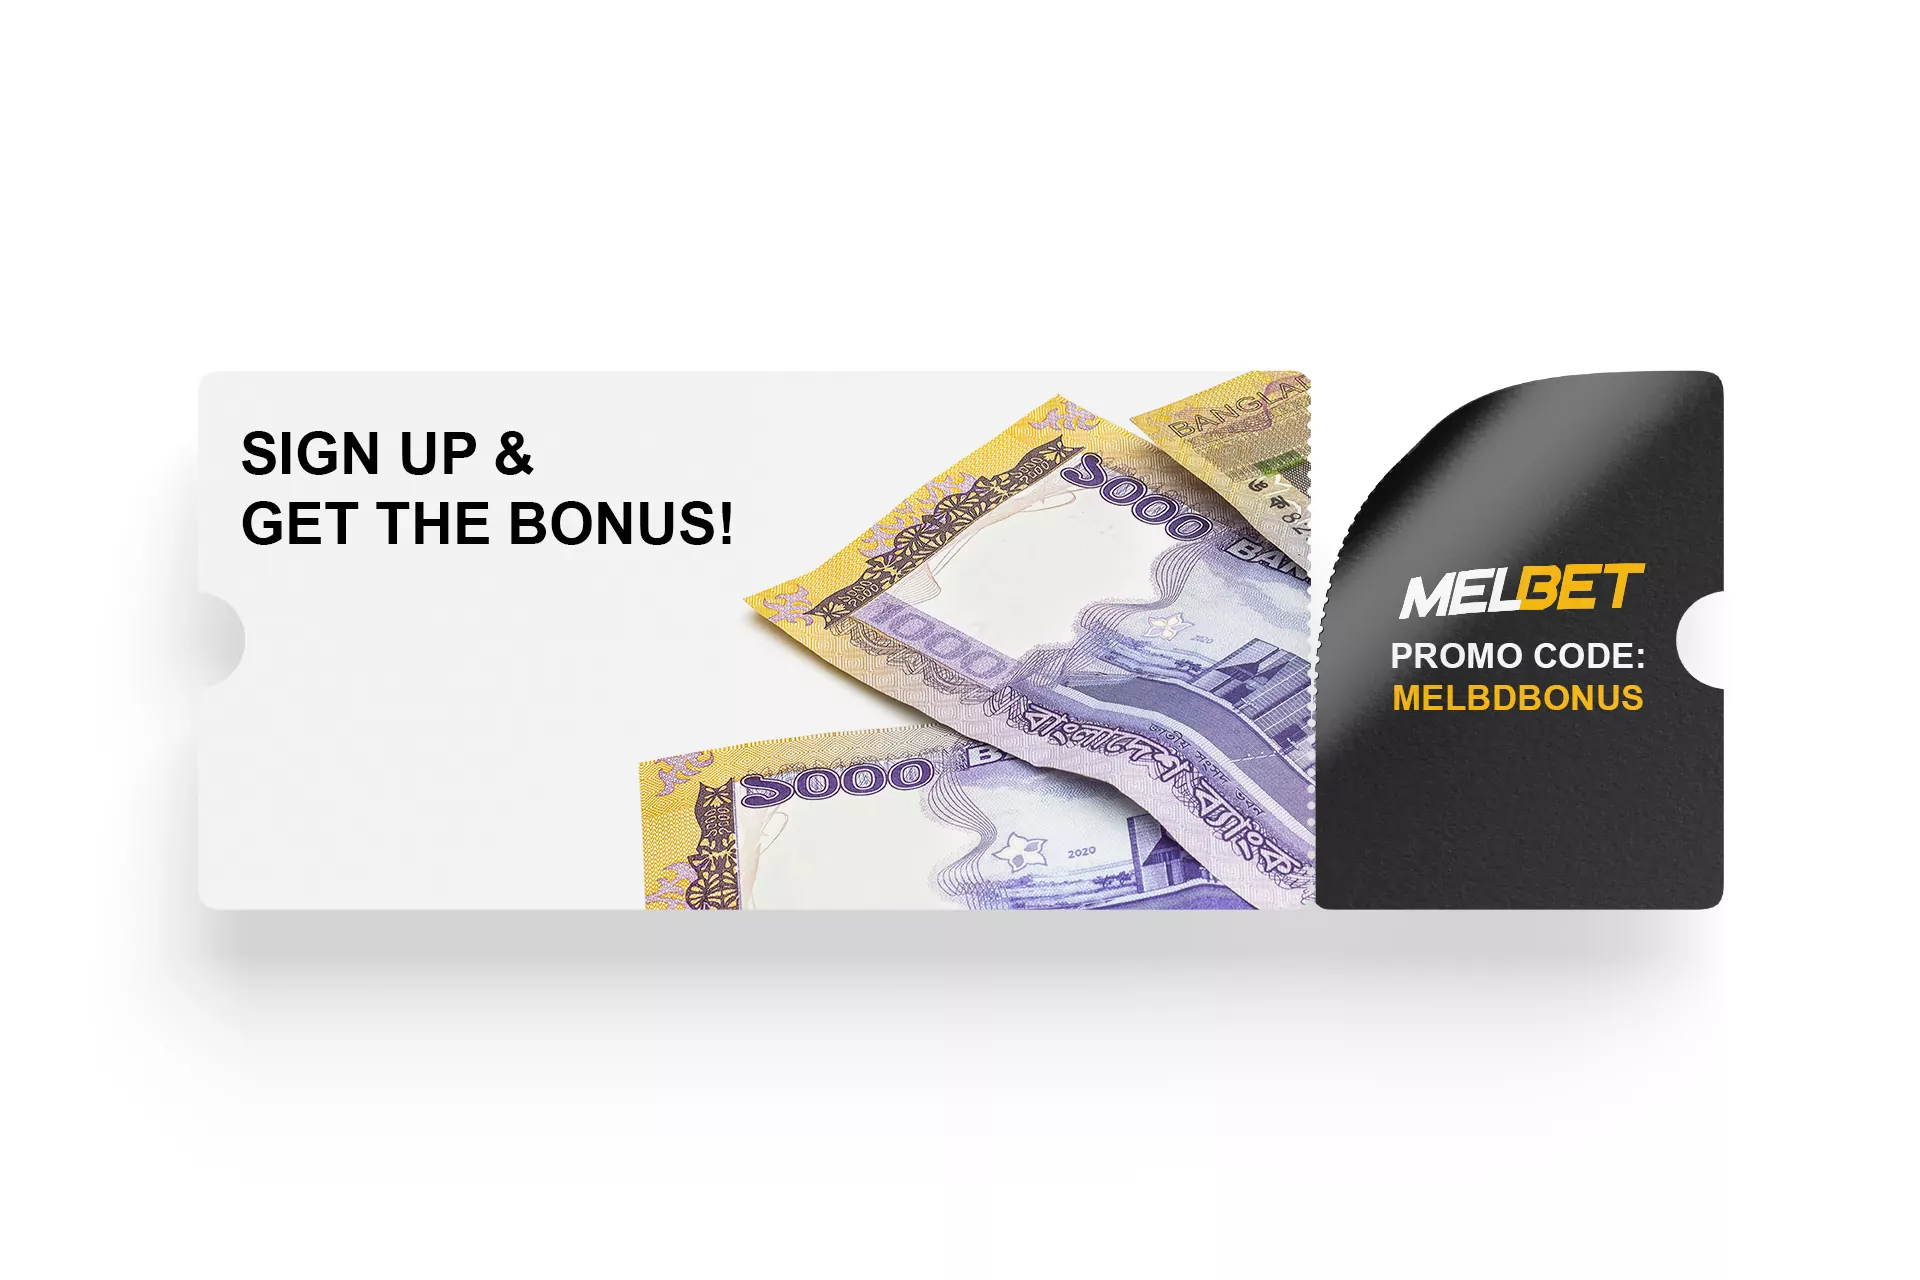 With our promo code, you will get additional bonuses on betting or playing online casinos at Melbet.